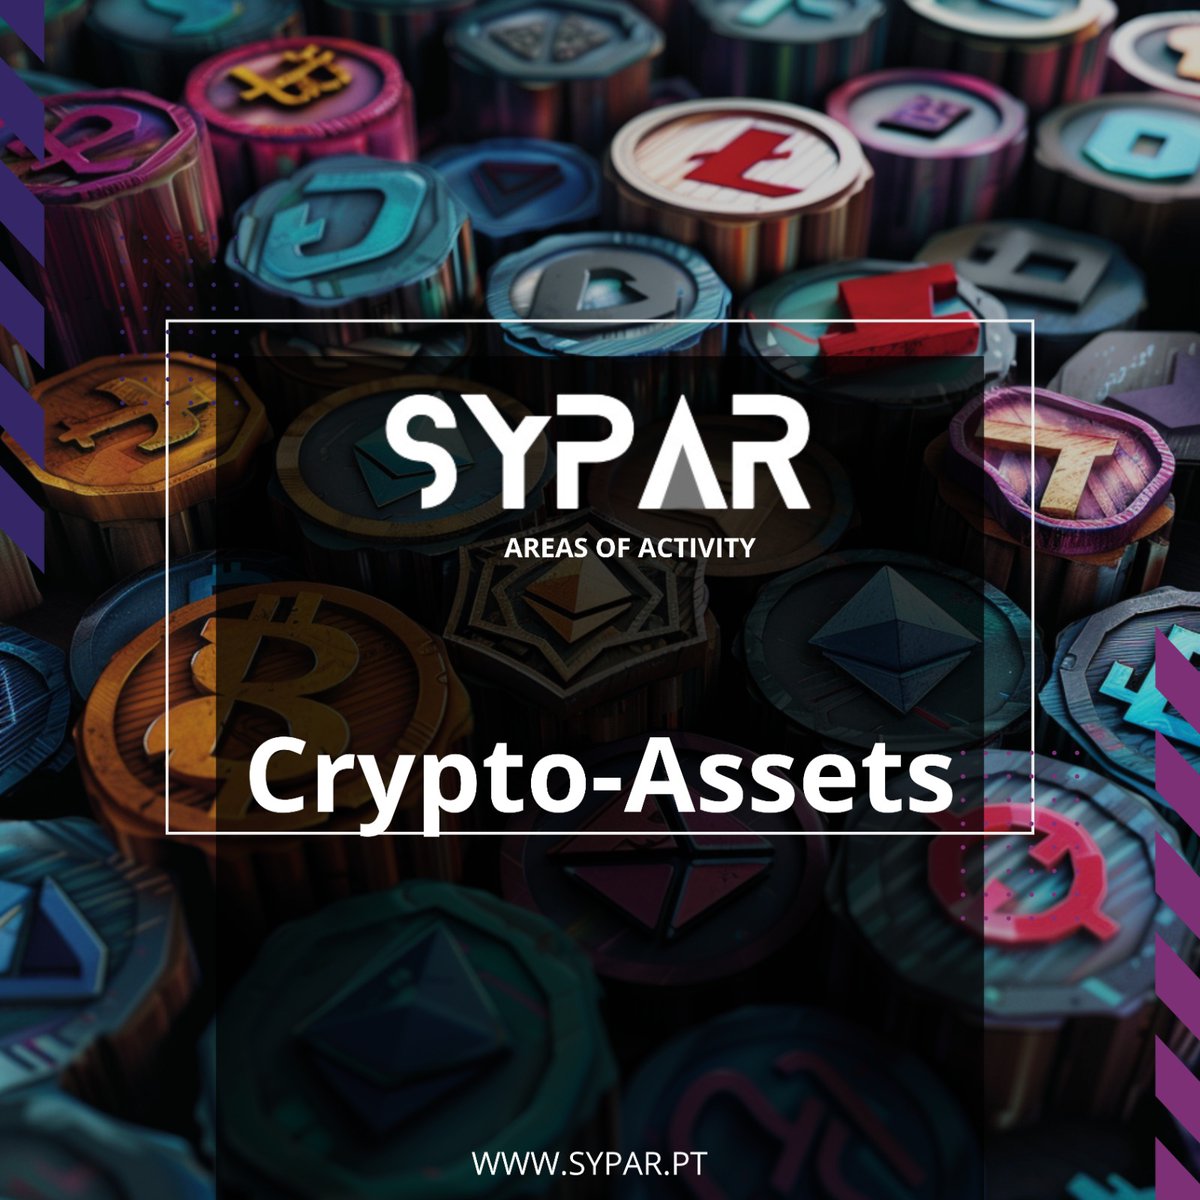 #Technological progress and the lack of legal harmonization have widened the global regulatory gap for #cryptoassets, leading to confusion and indiscriminate terminology use. The #MiCAR framework broadens the definition of #cryptoassets beyond #monetary functions.